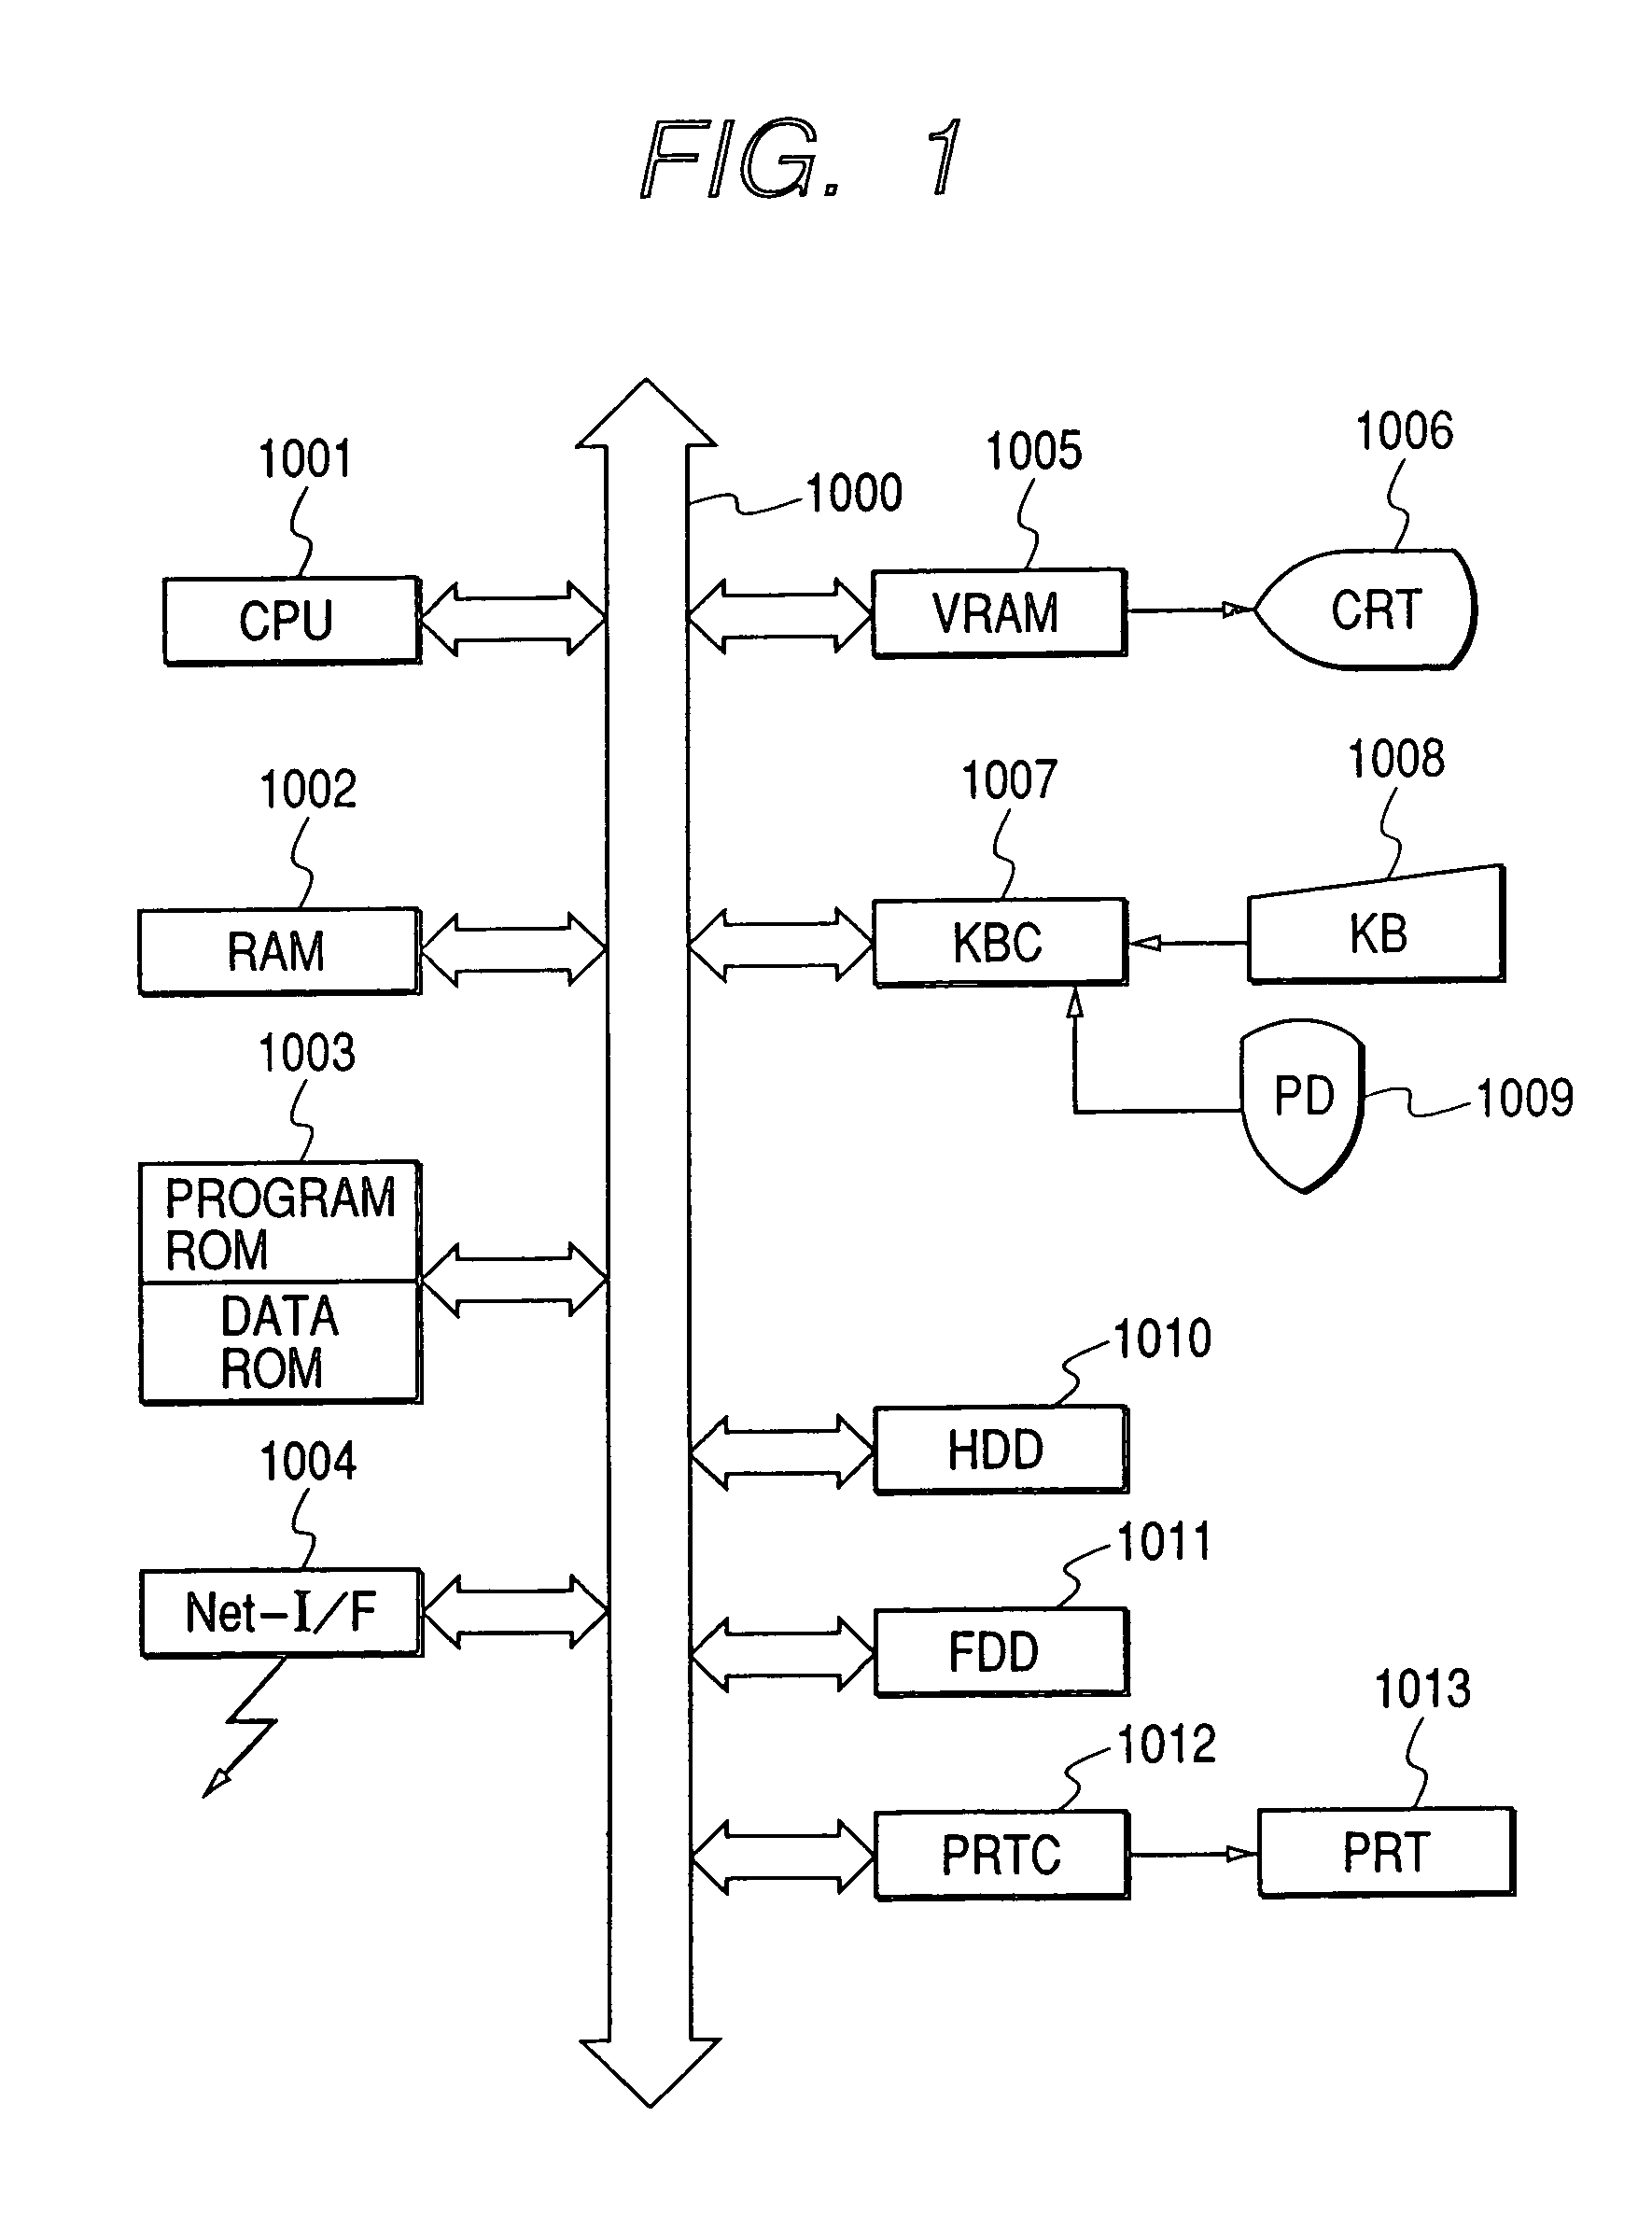 Display and control of permitted data processing based on control information extracted from the data